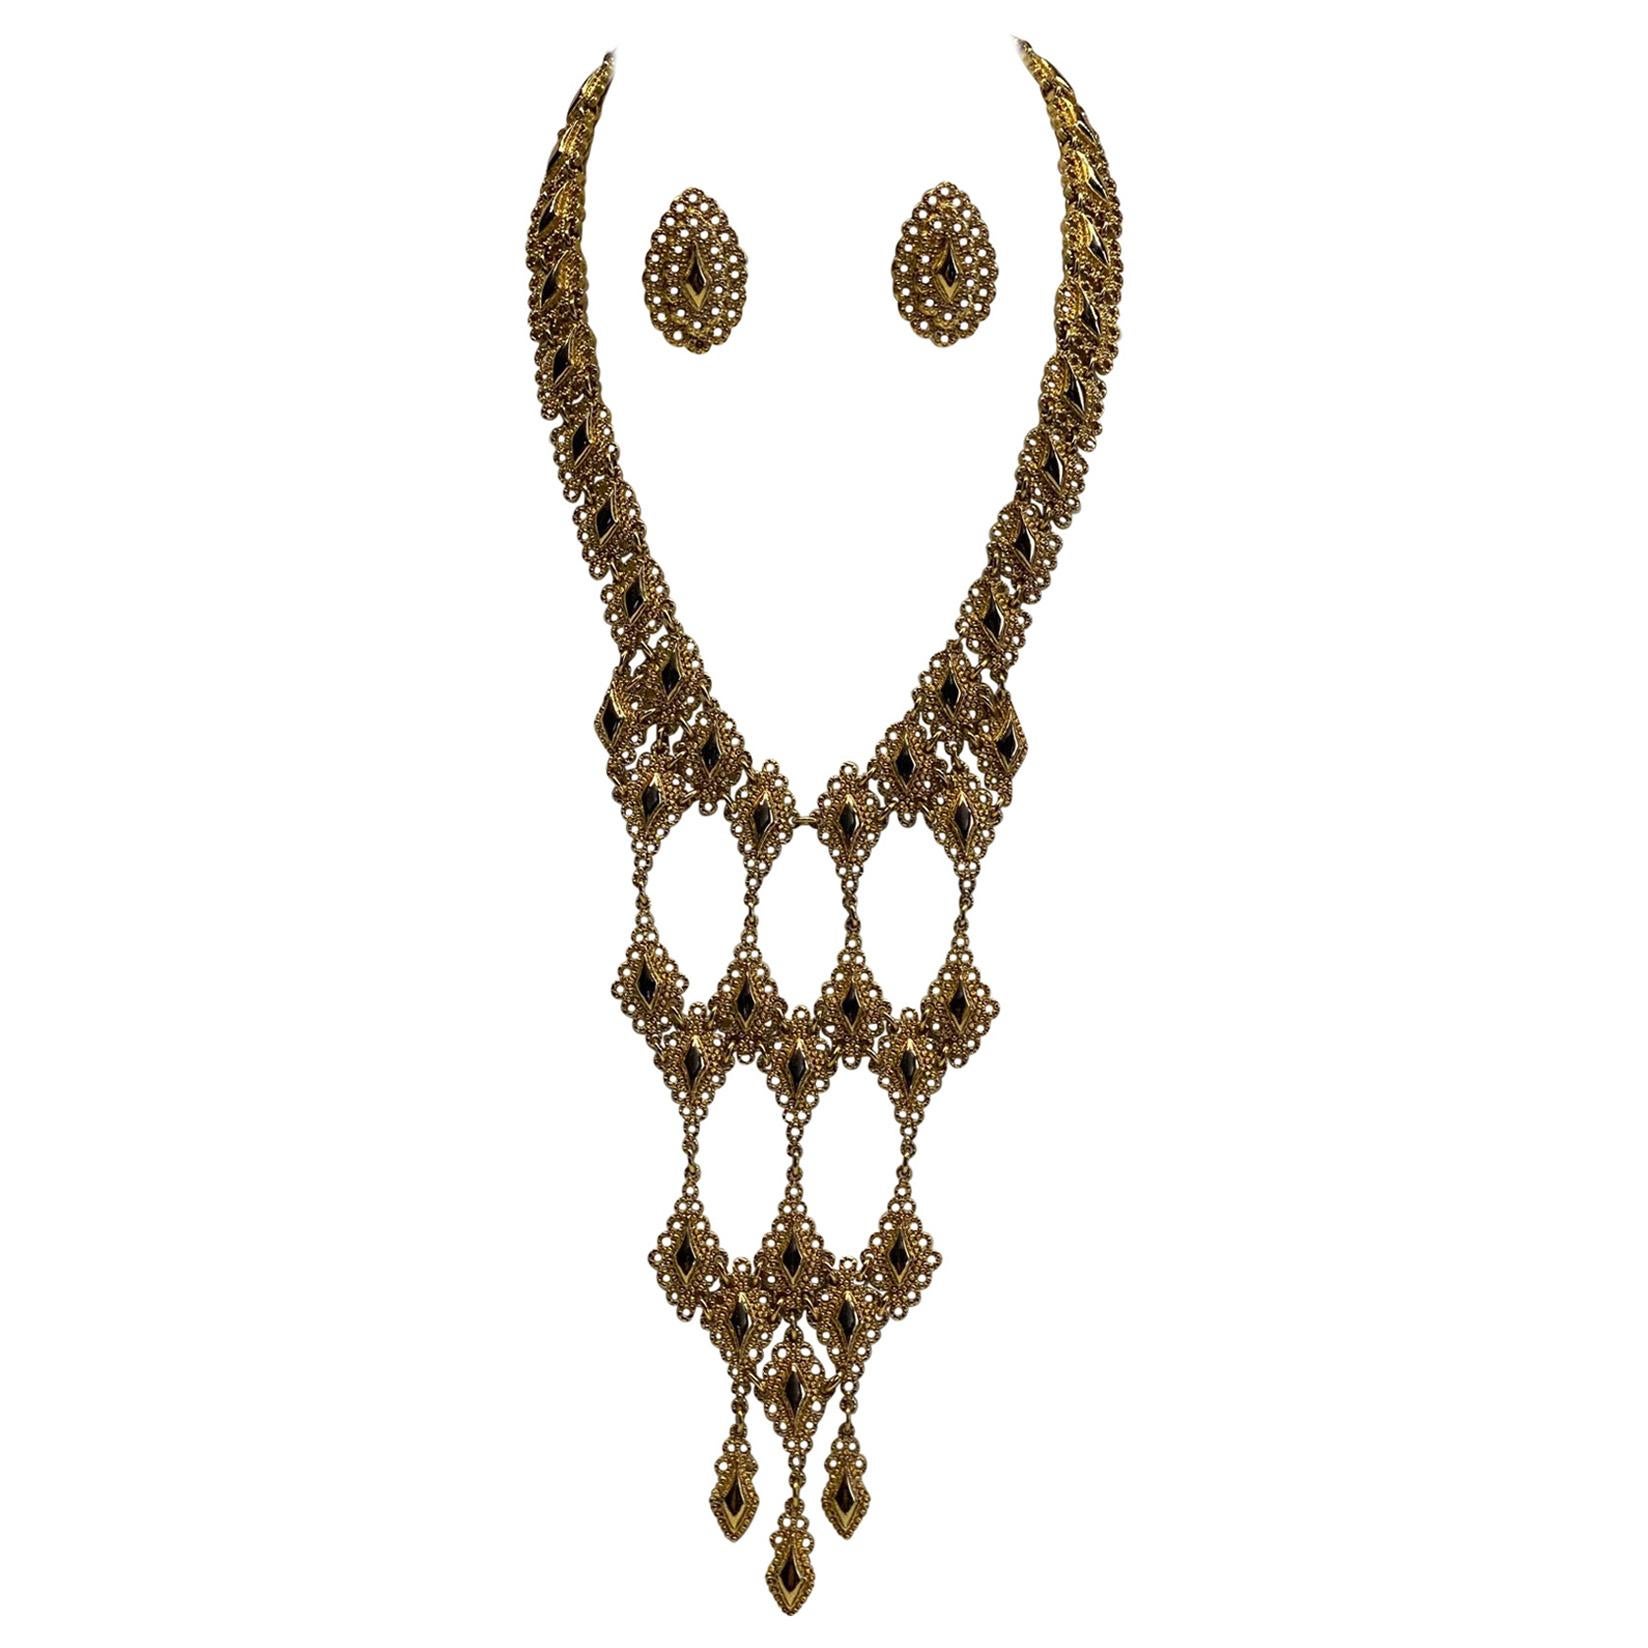 Monet 1972 "Palaise" Gold Bib Necklace and Earrings Set